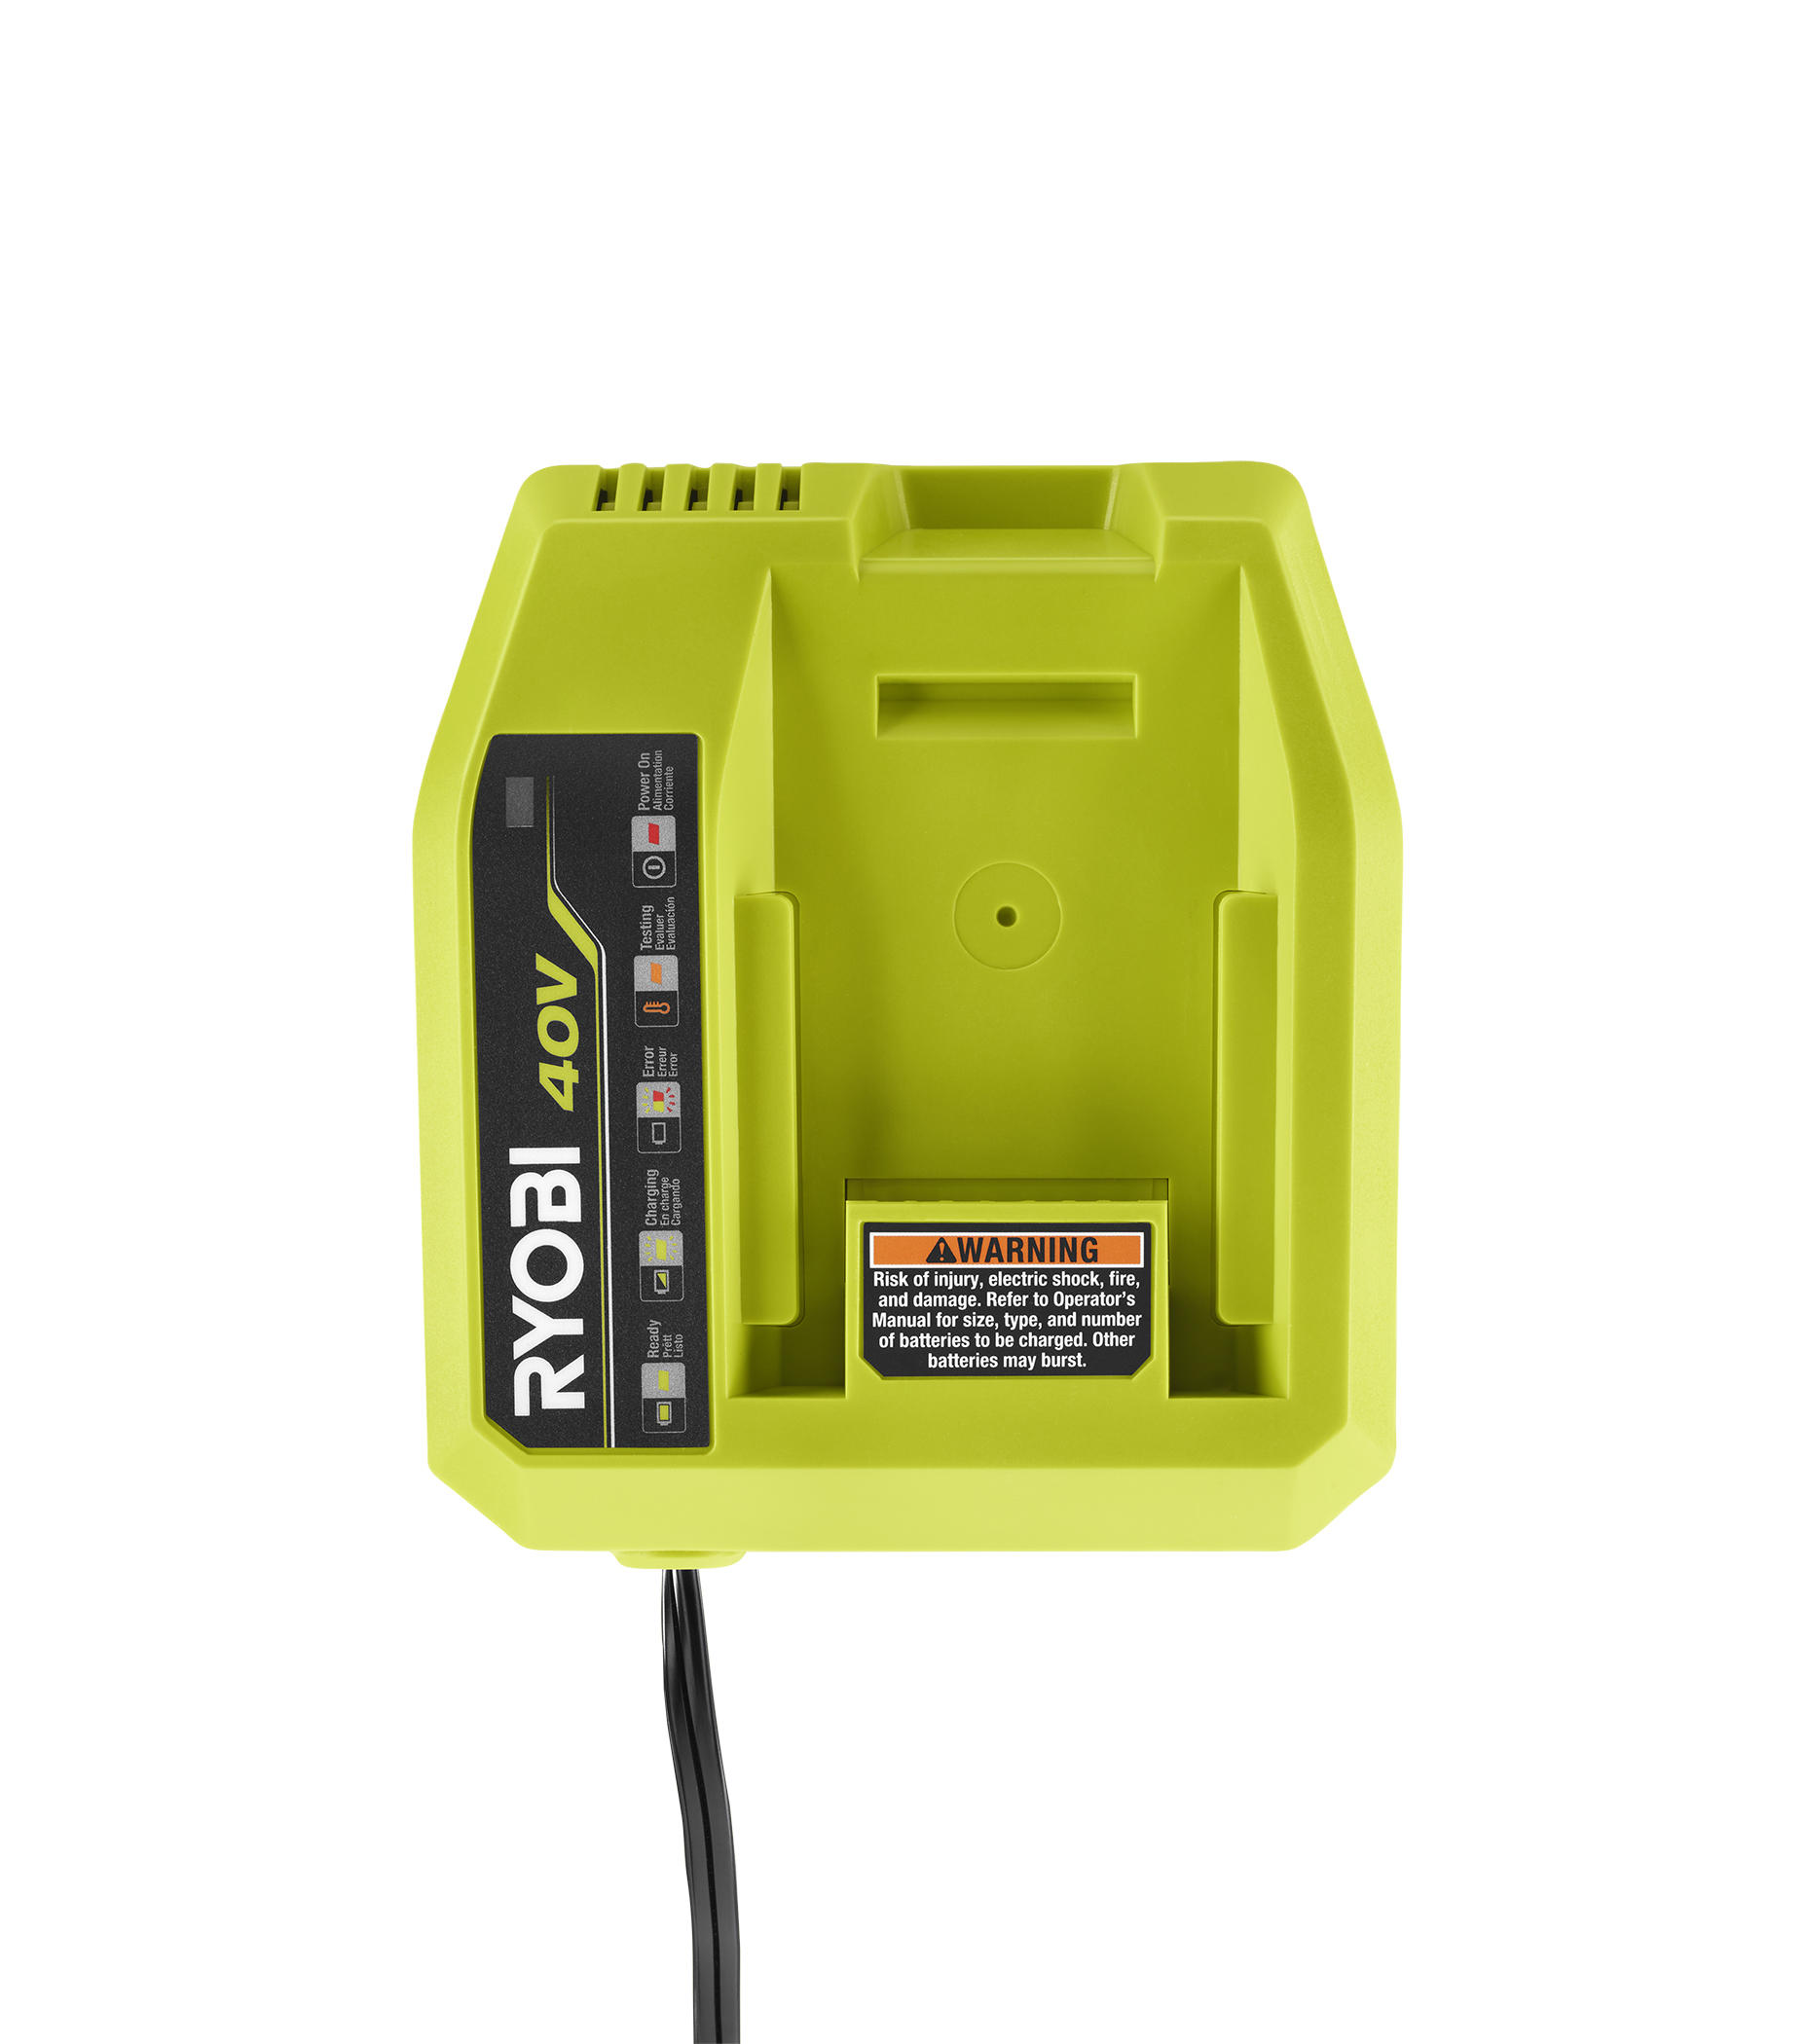 IQV40 Series 40V Charger - BC1161